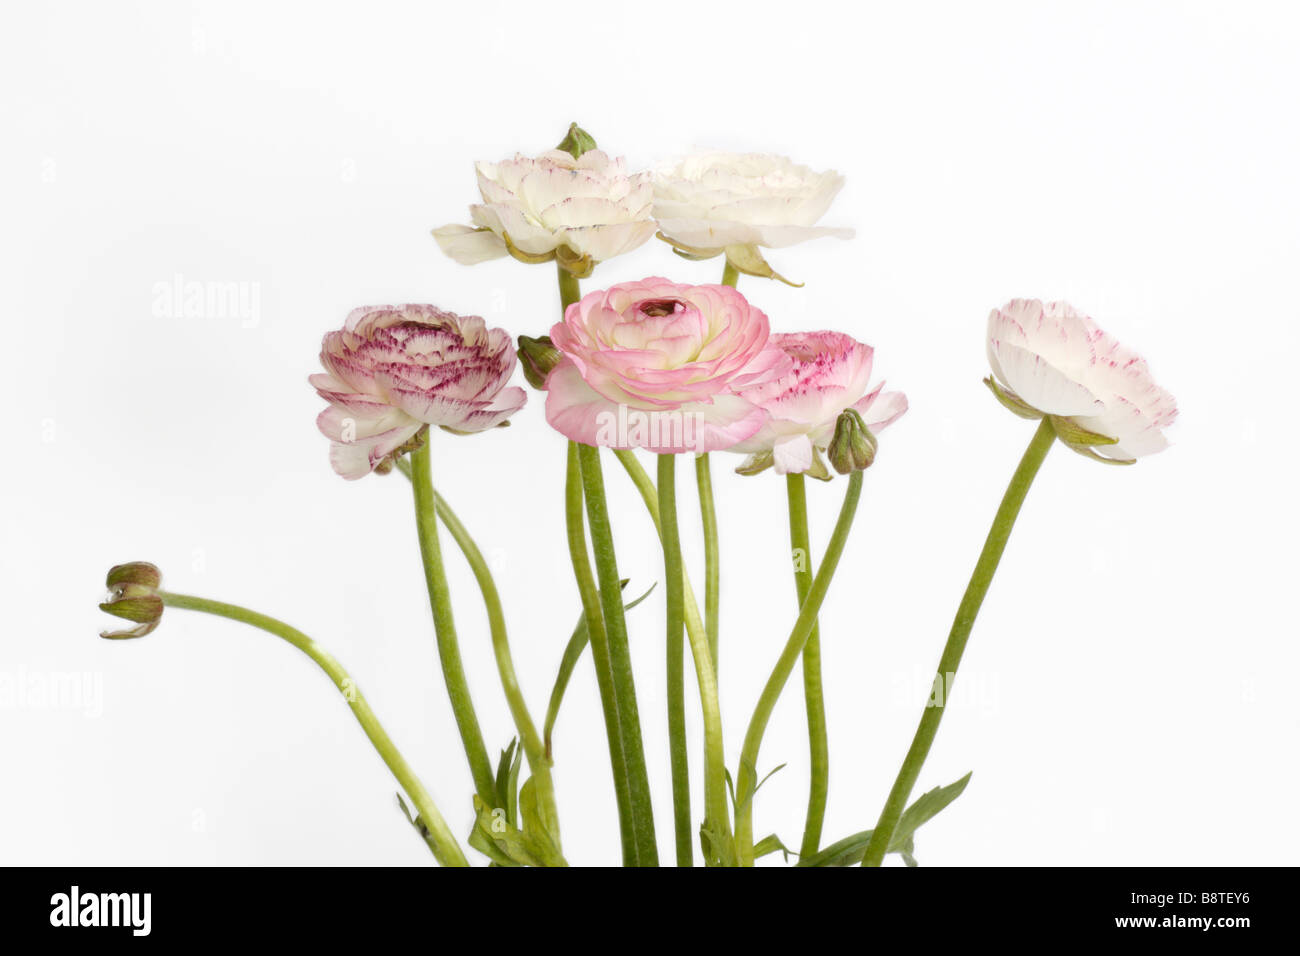 Ranunculus asiaticus or Persian Buttercup in front of a white background Stock Photo